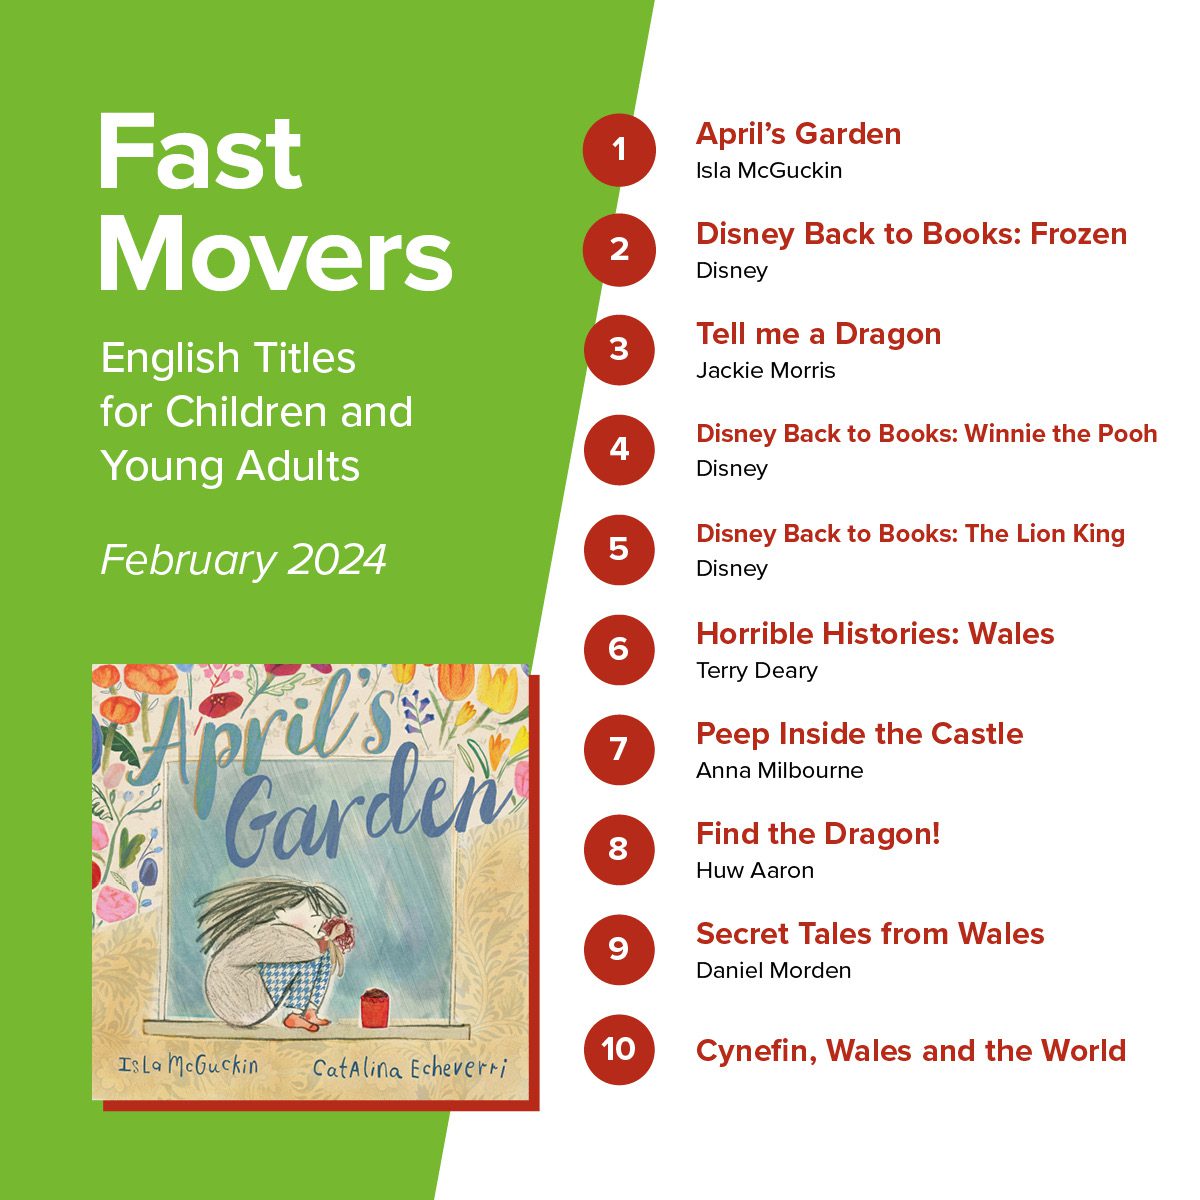 Fast Movers June